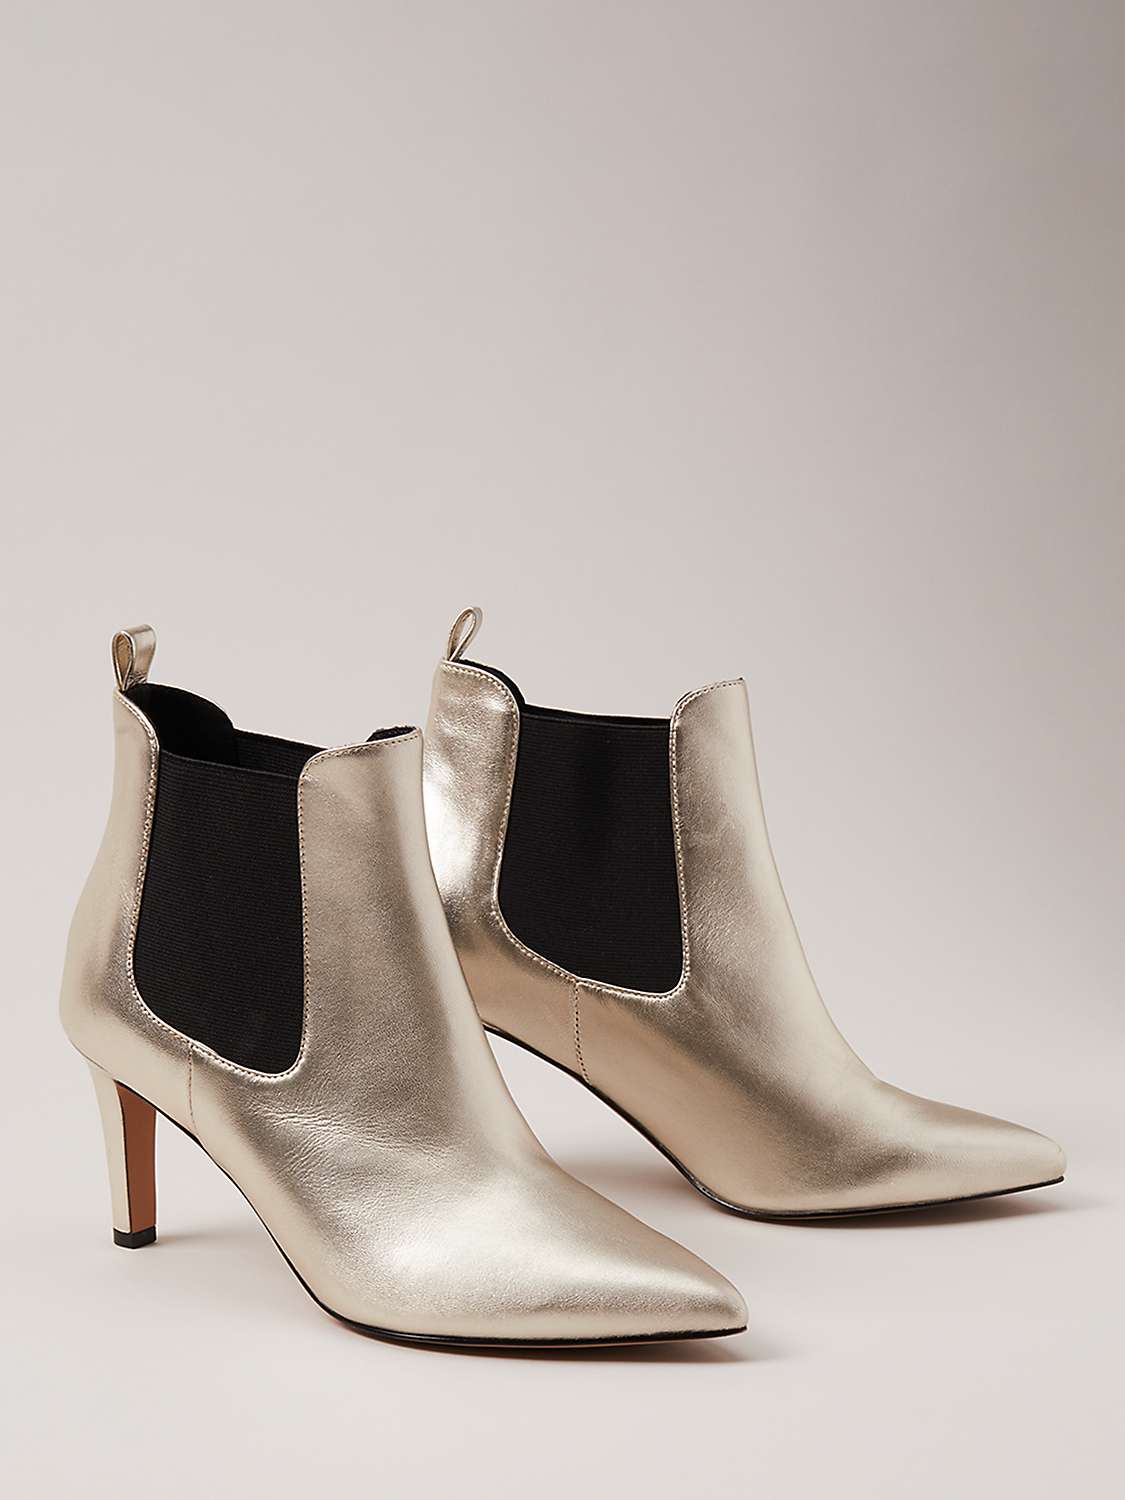 Buy Phase Eight Metallic Leather Ankle Boots, Gold Online at johnlewis.com